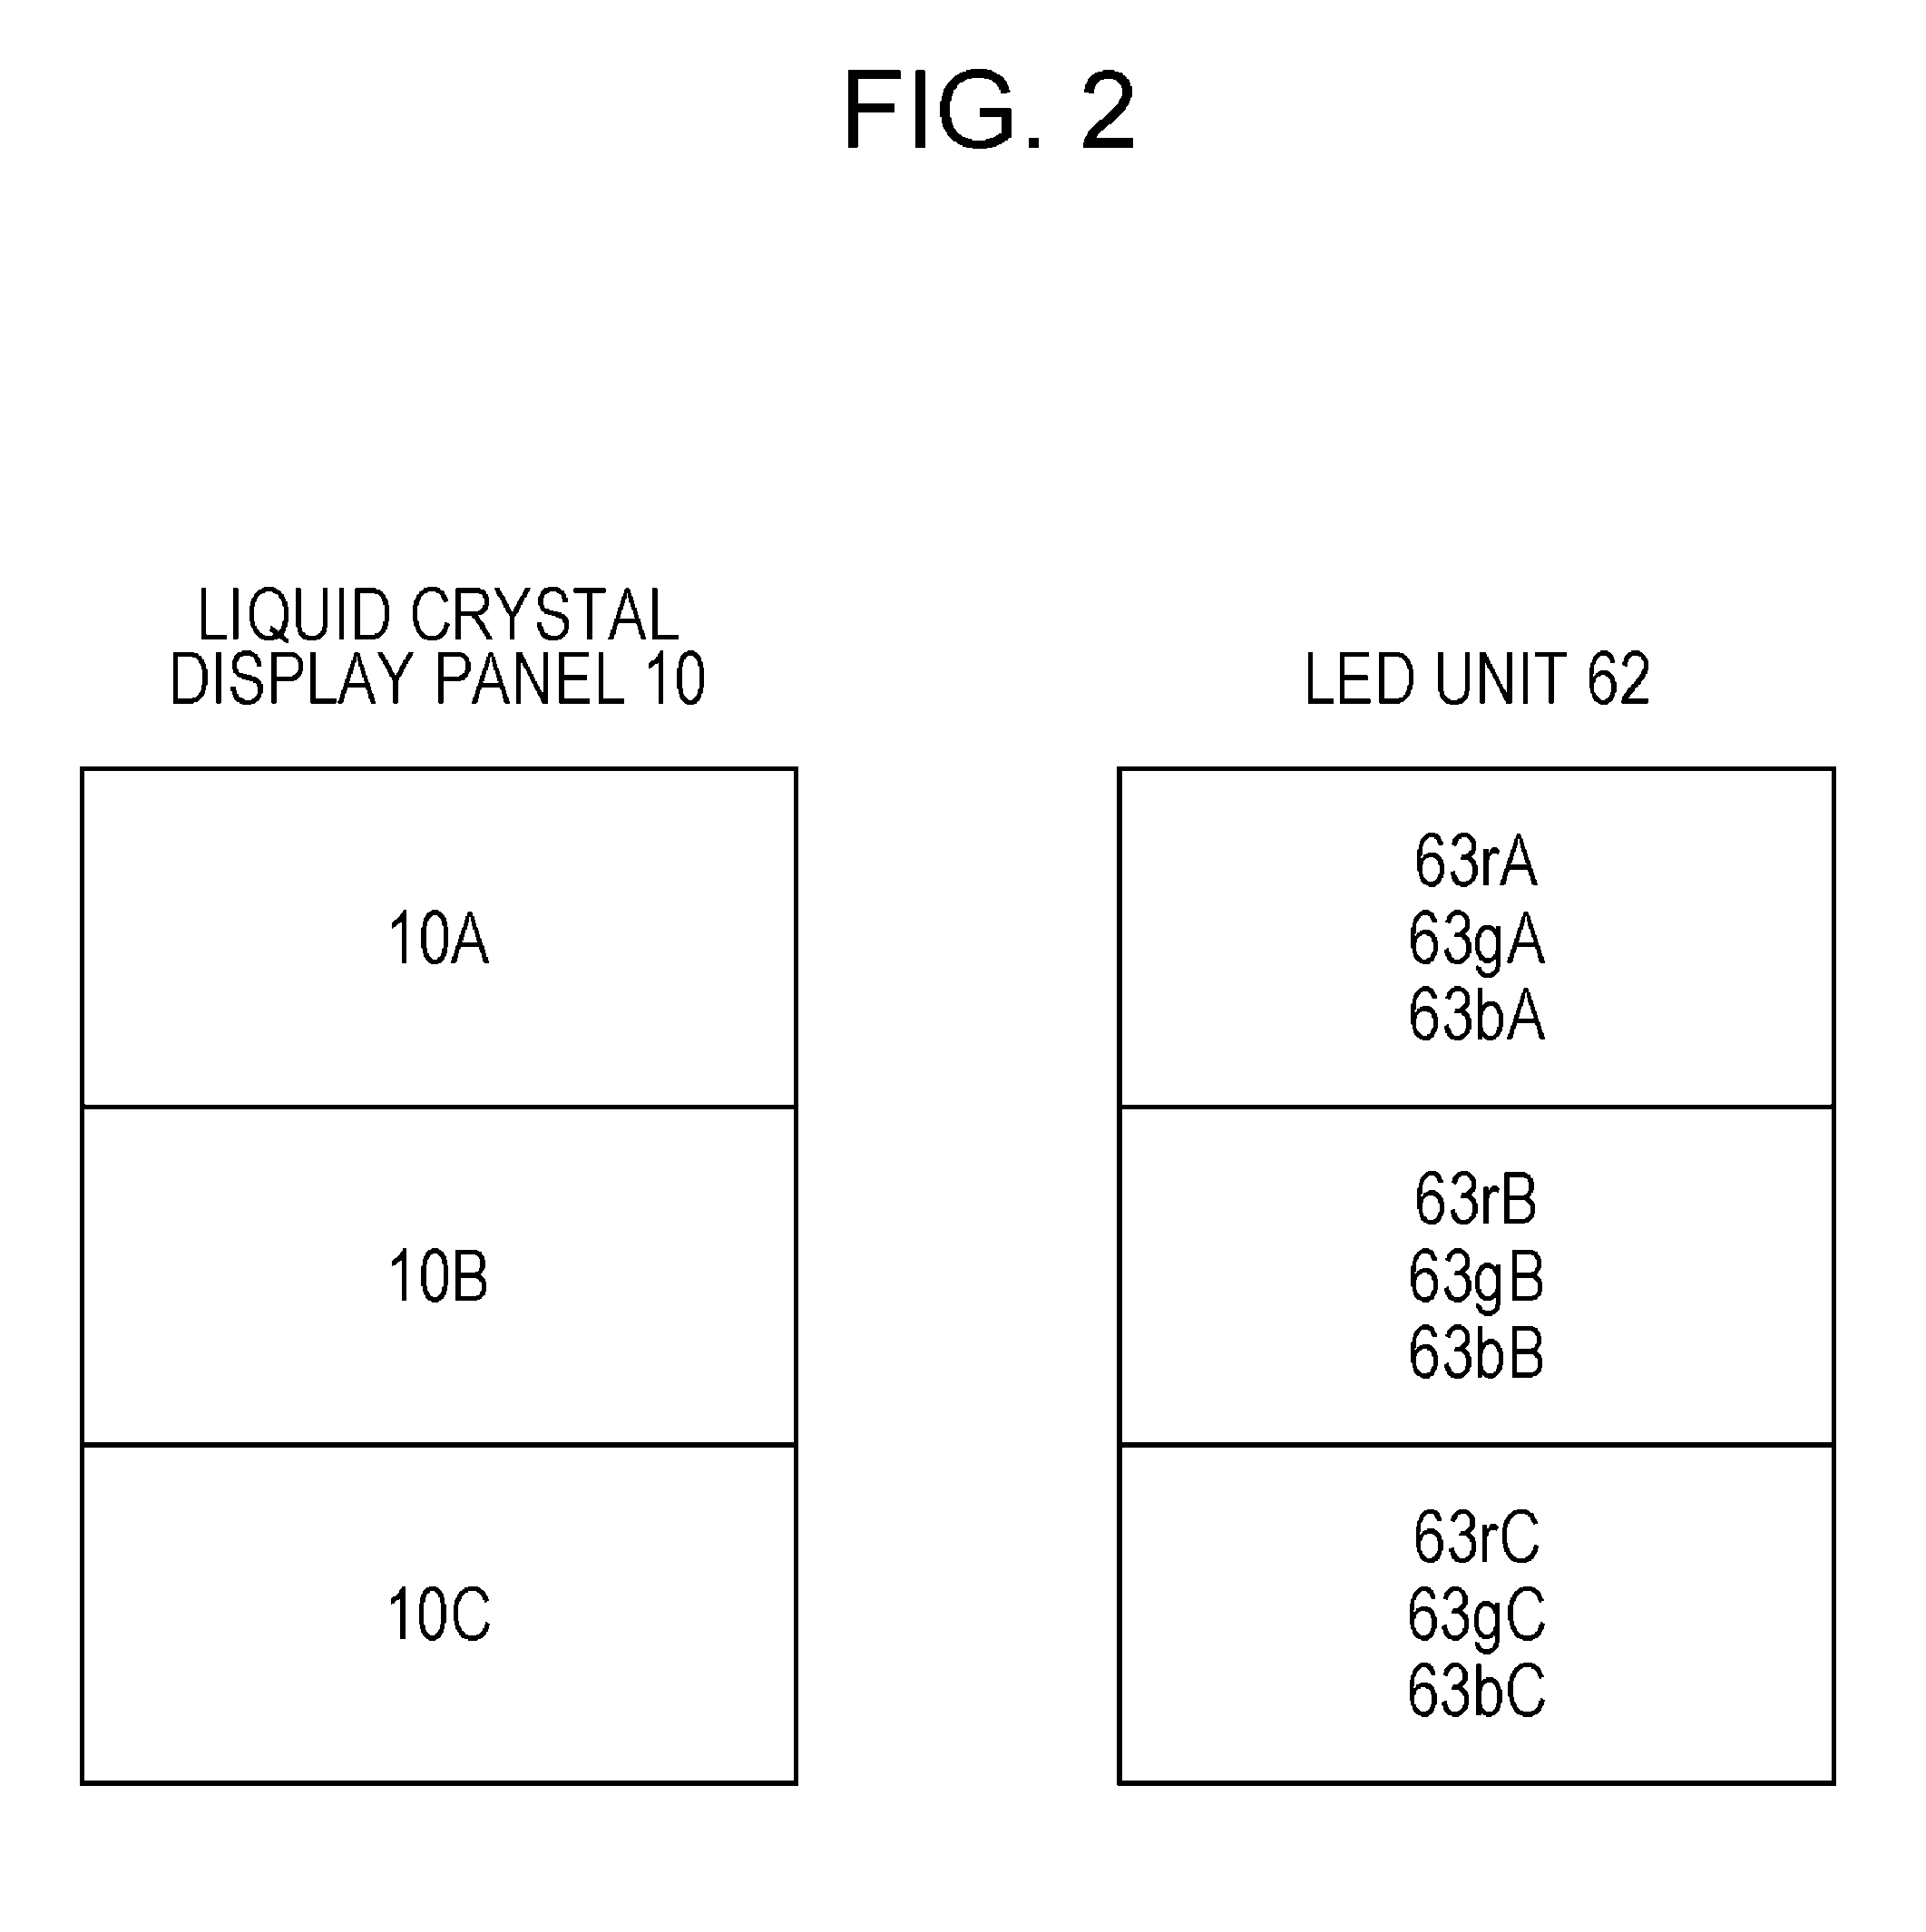 Display device and method that divides one frame period into a plurality of subframe periods and that displays screens of different colors in accordance with the subframe periods